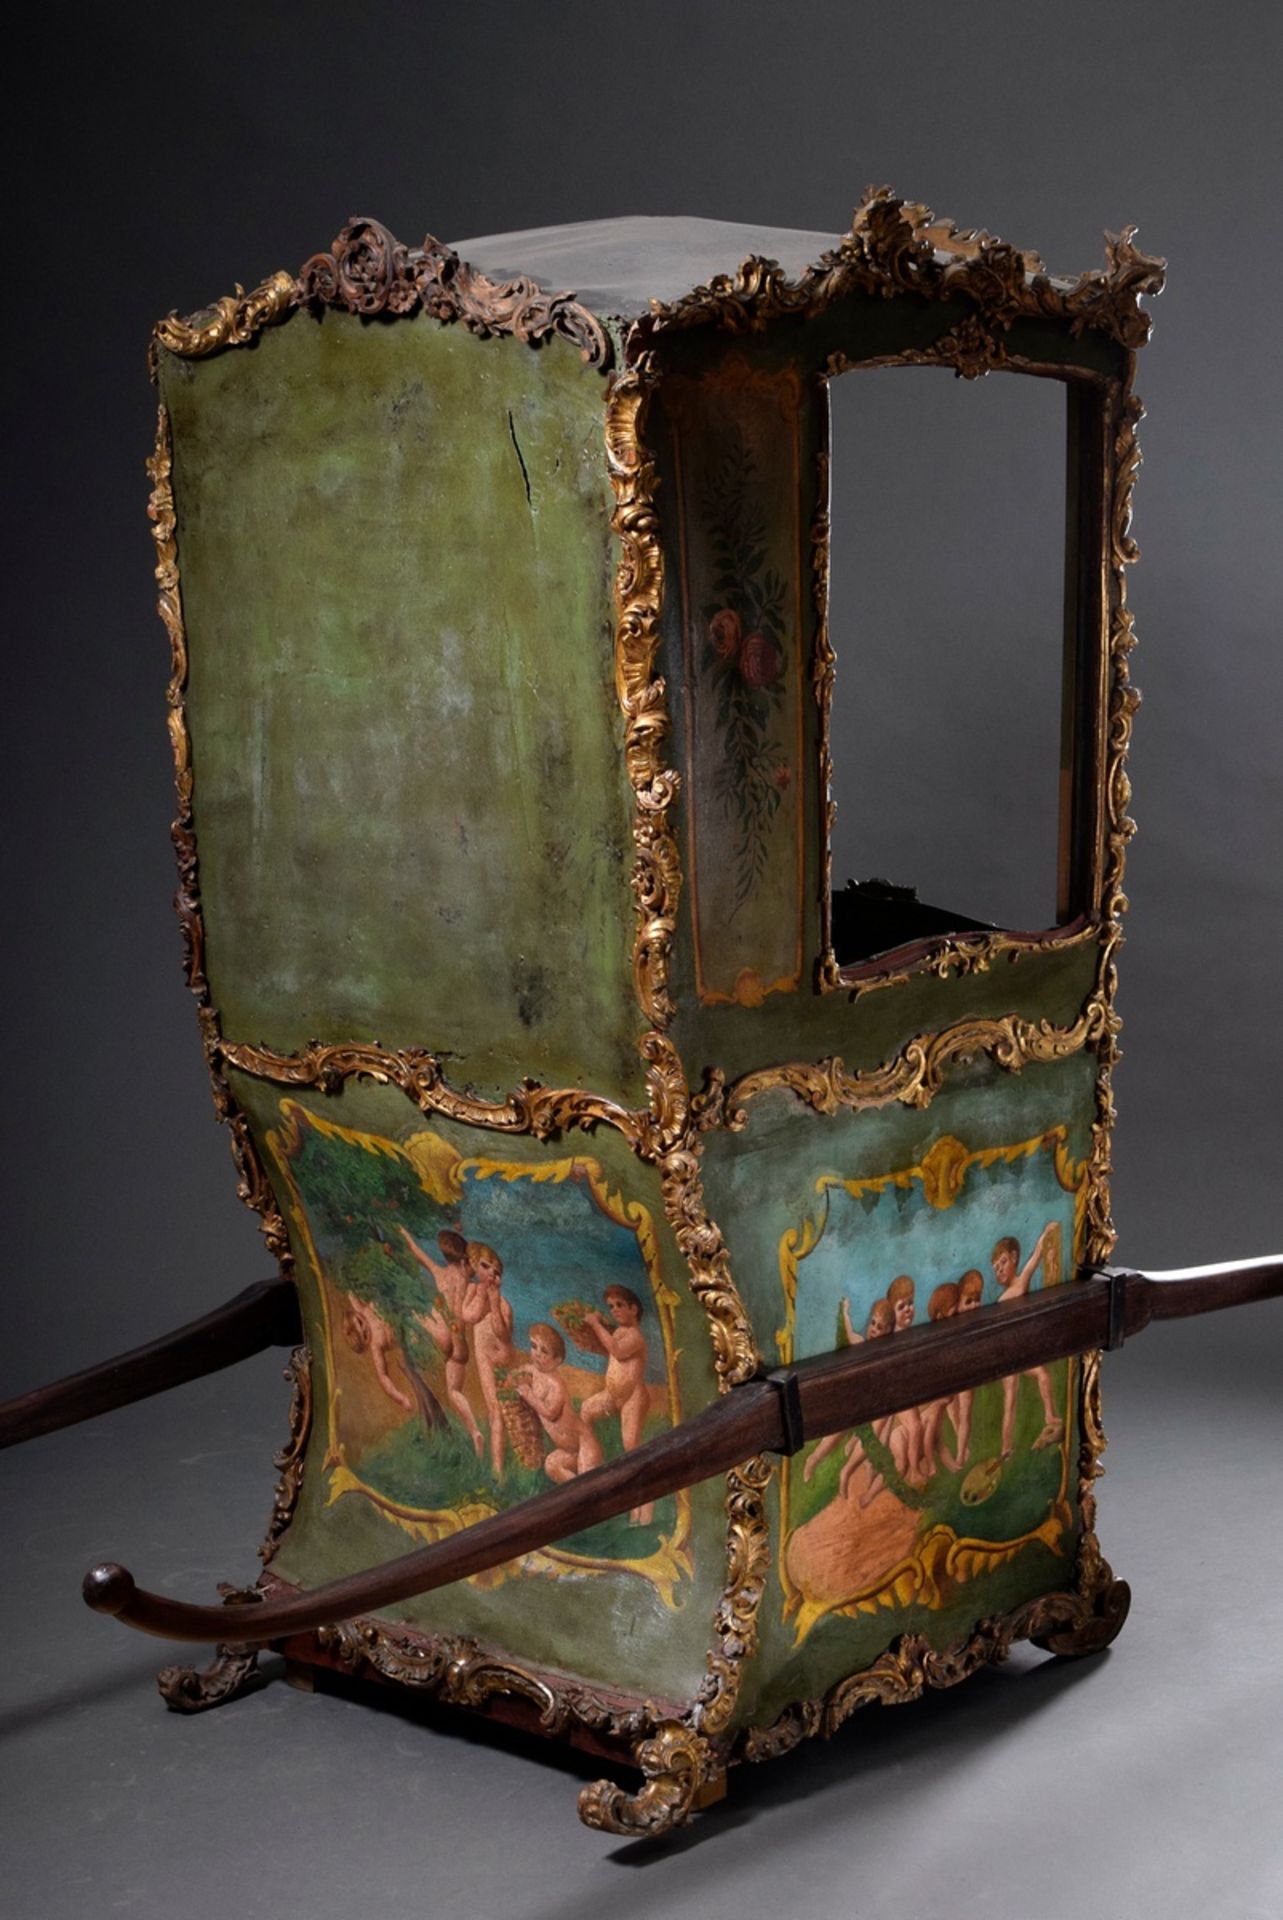 Rococo-style sedan chair with painted canvas covering "Putten-Allegorien" and carved rocaille mould - Image 4 of 15